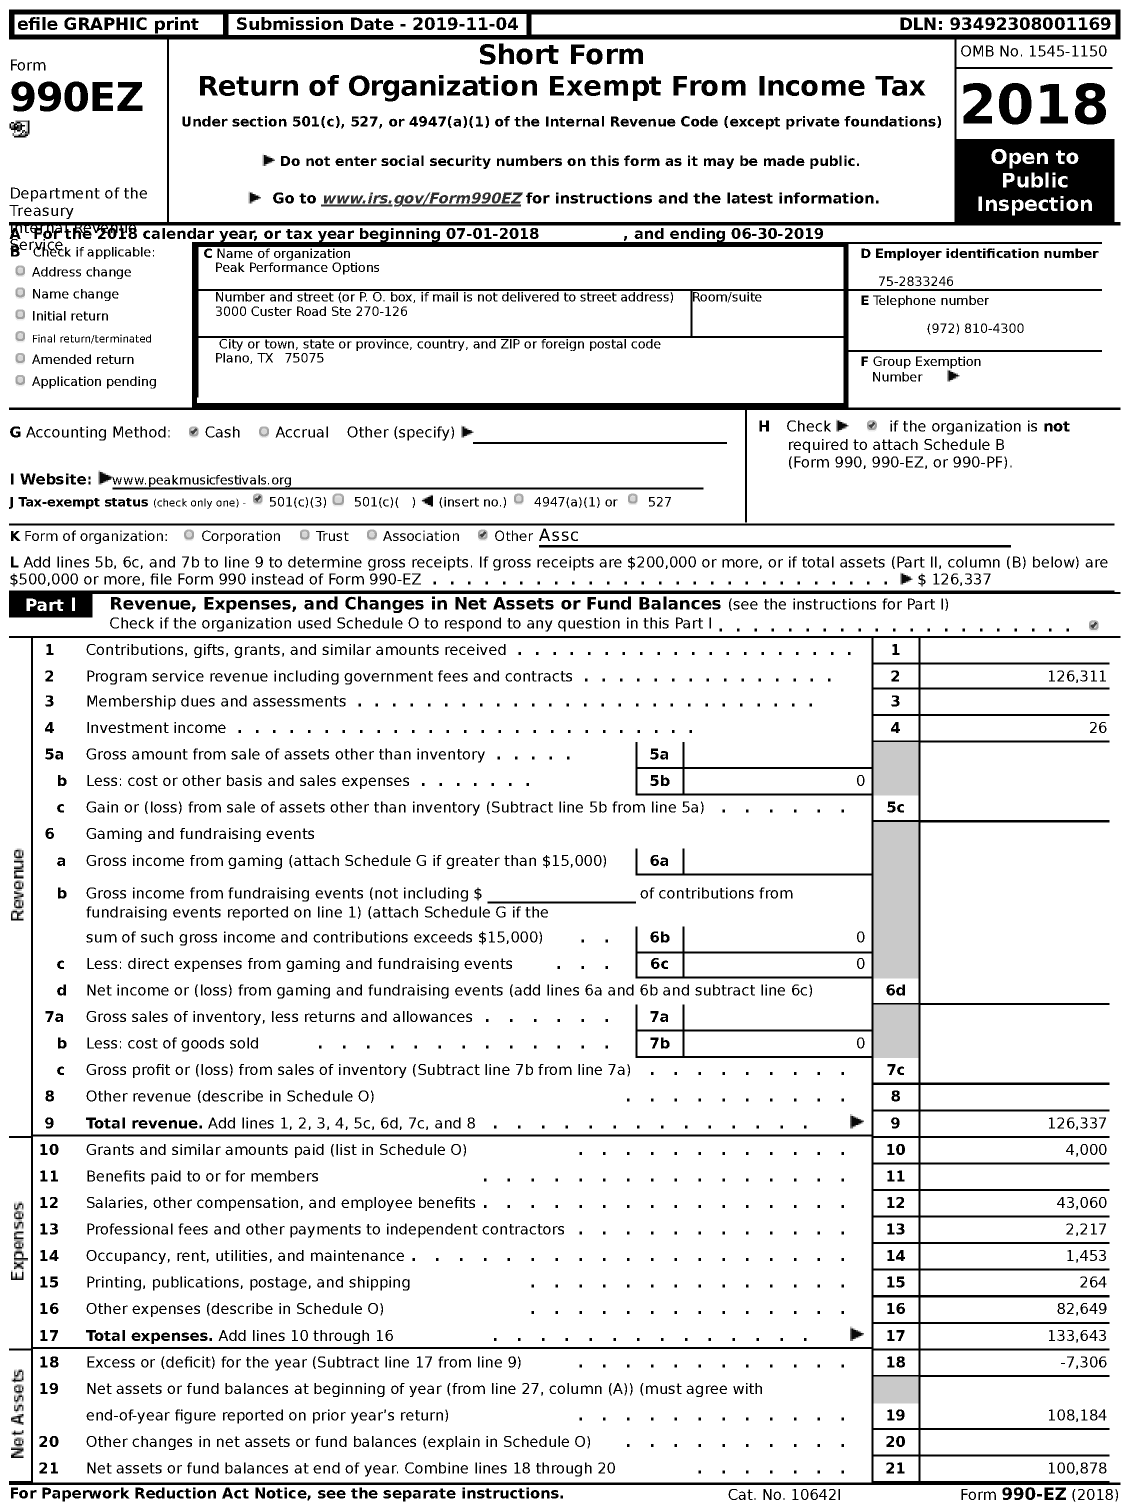 Image of first page of 2018 Form 990EZ for Peak Performance Options